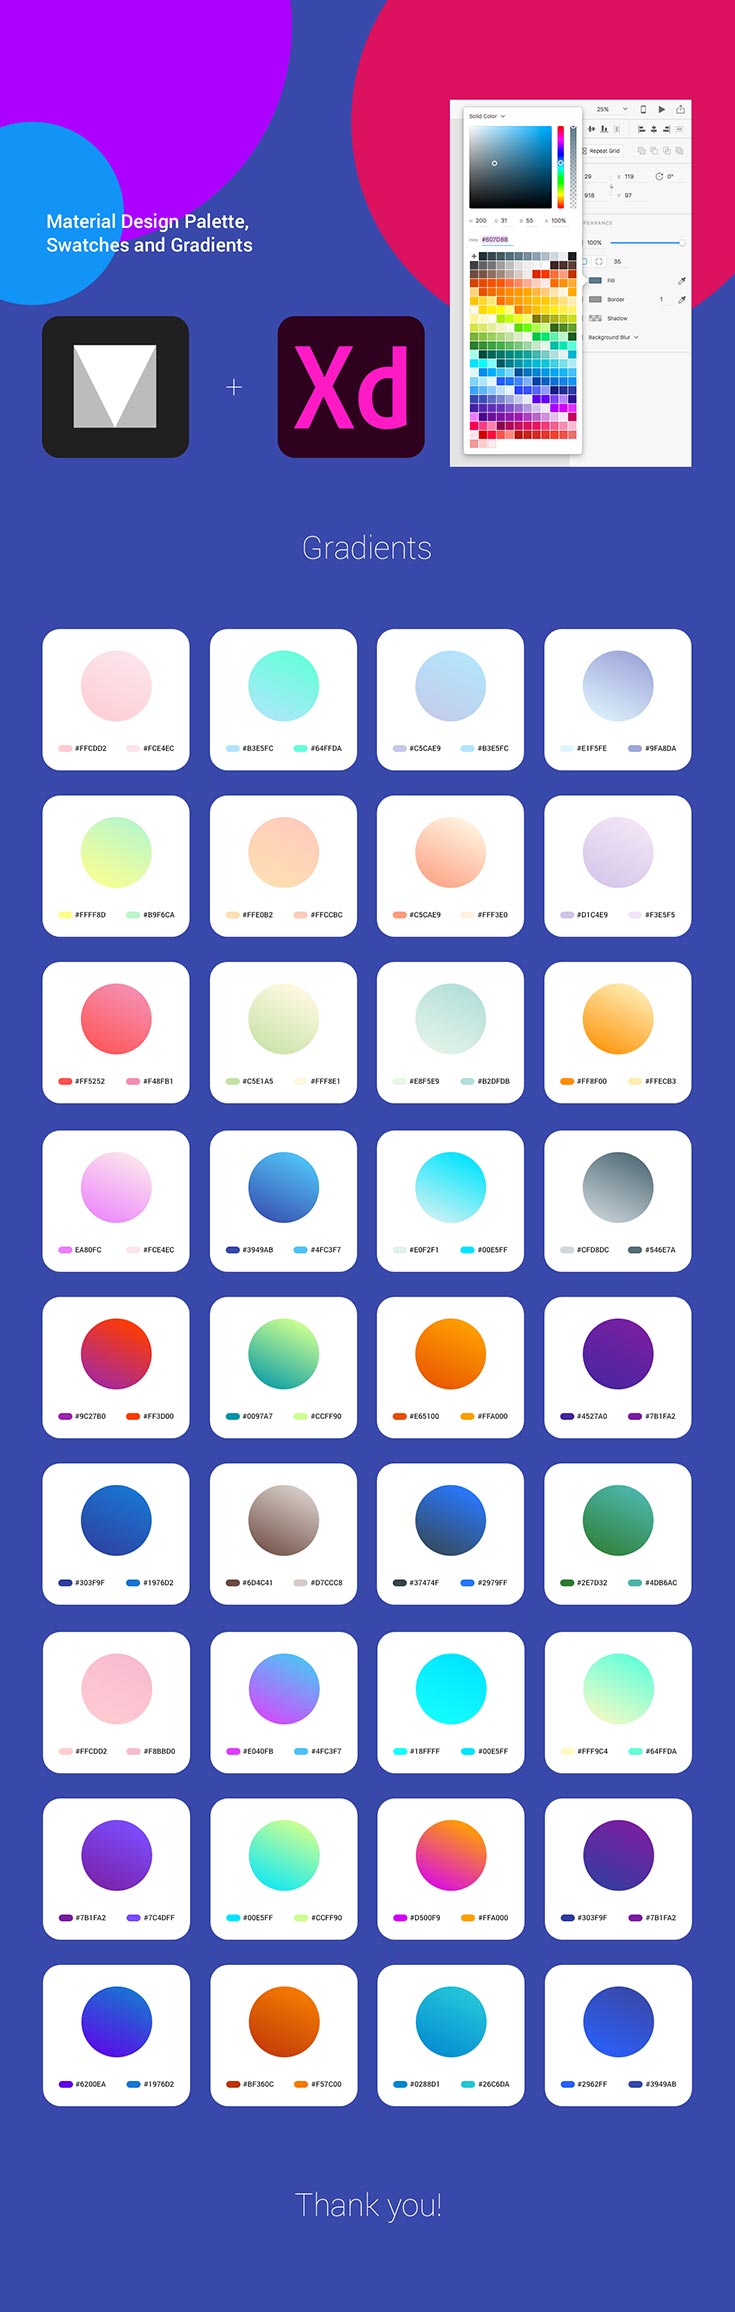 Material Design Palette, Swatches and Gradients